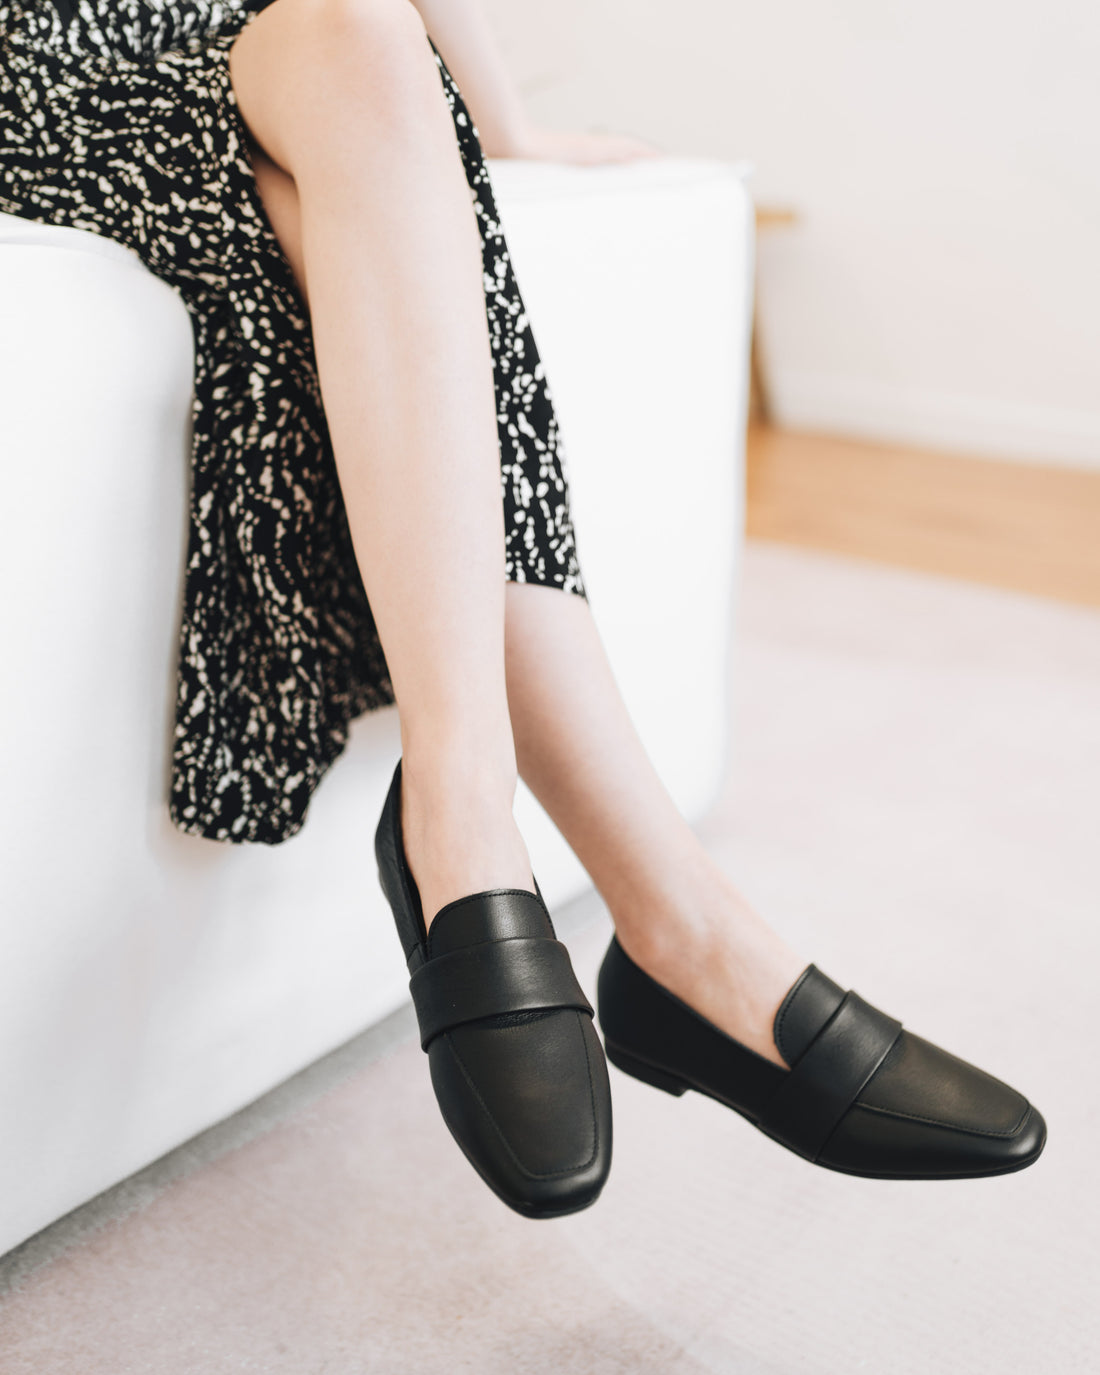 Delia Loafers - Leather Black